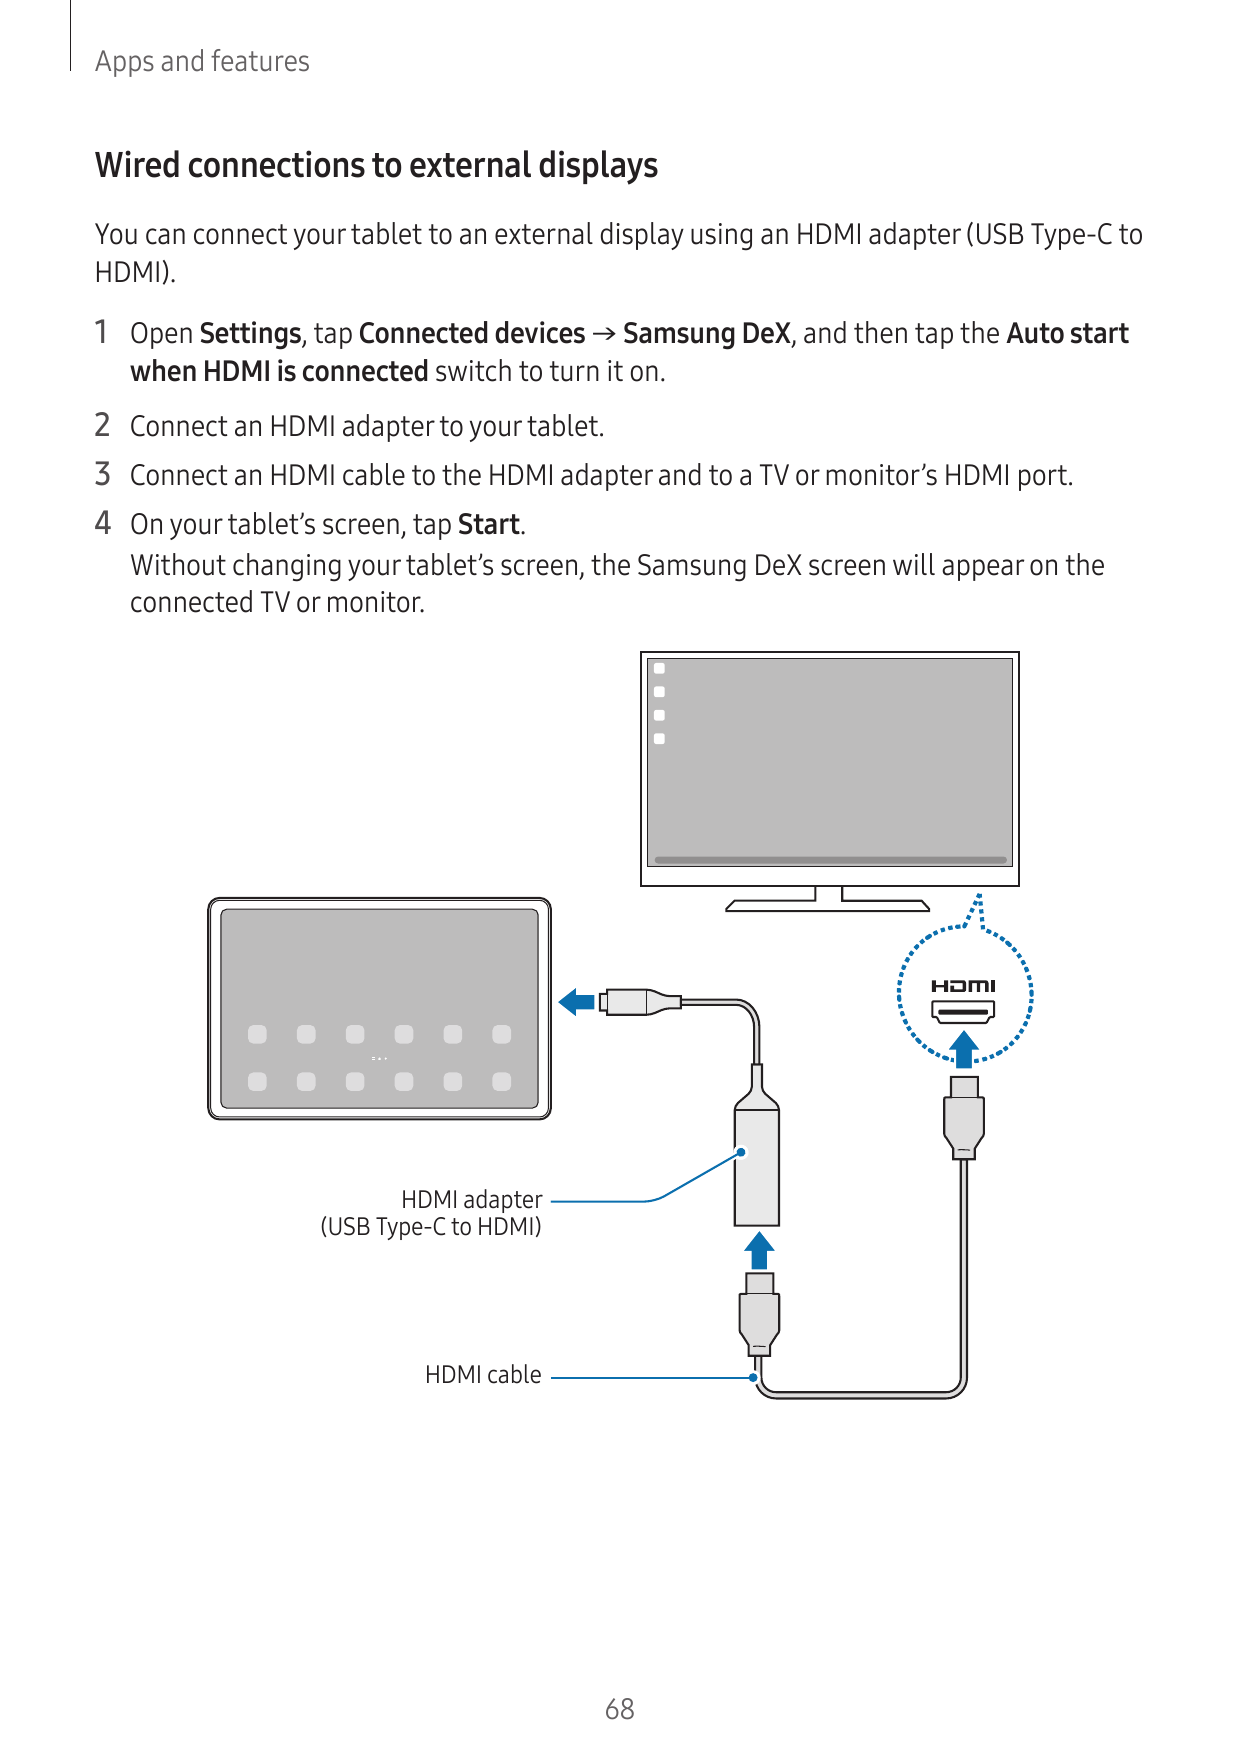 Apps and featuresWired connections to external displaysYou can connect your tablet to an external display using an HDMI adapter 